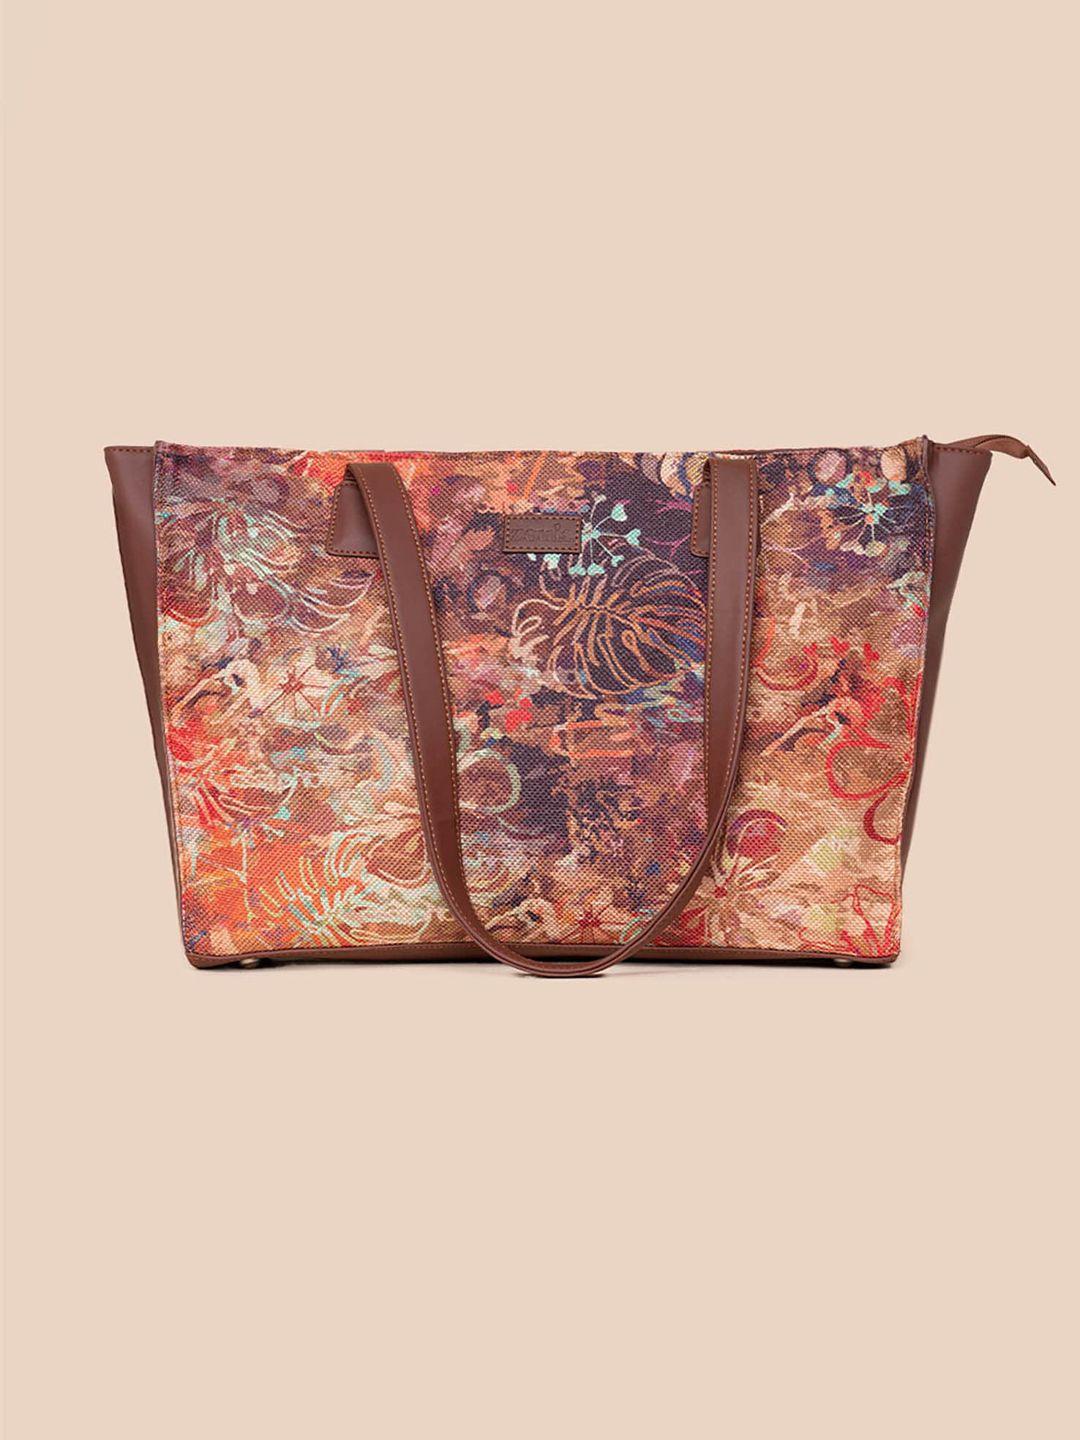 zouk floral printed structured tote bag